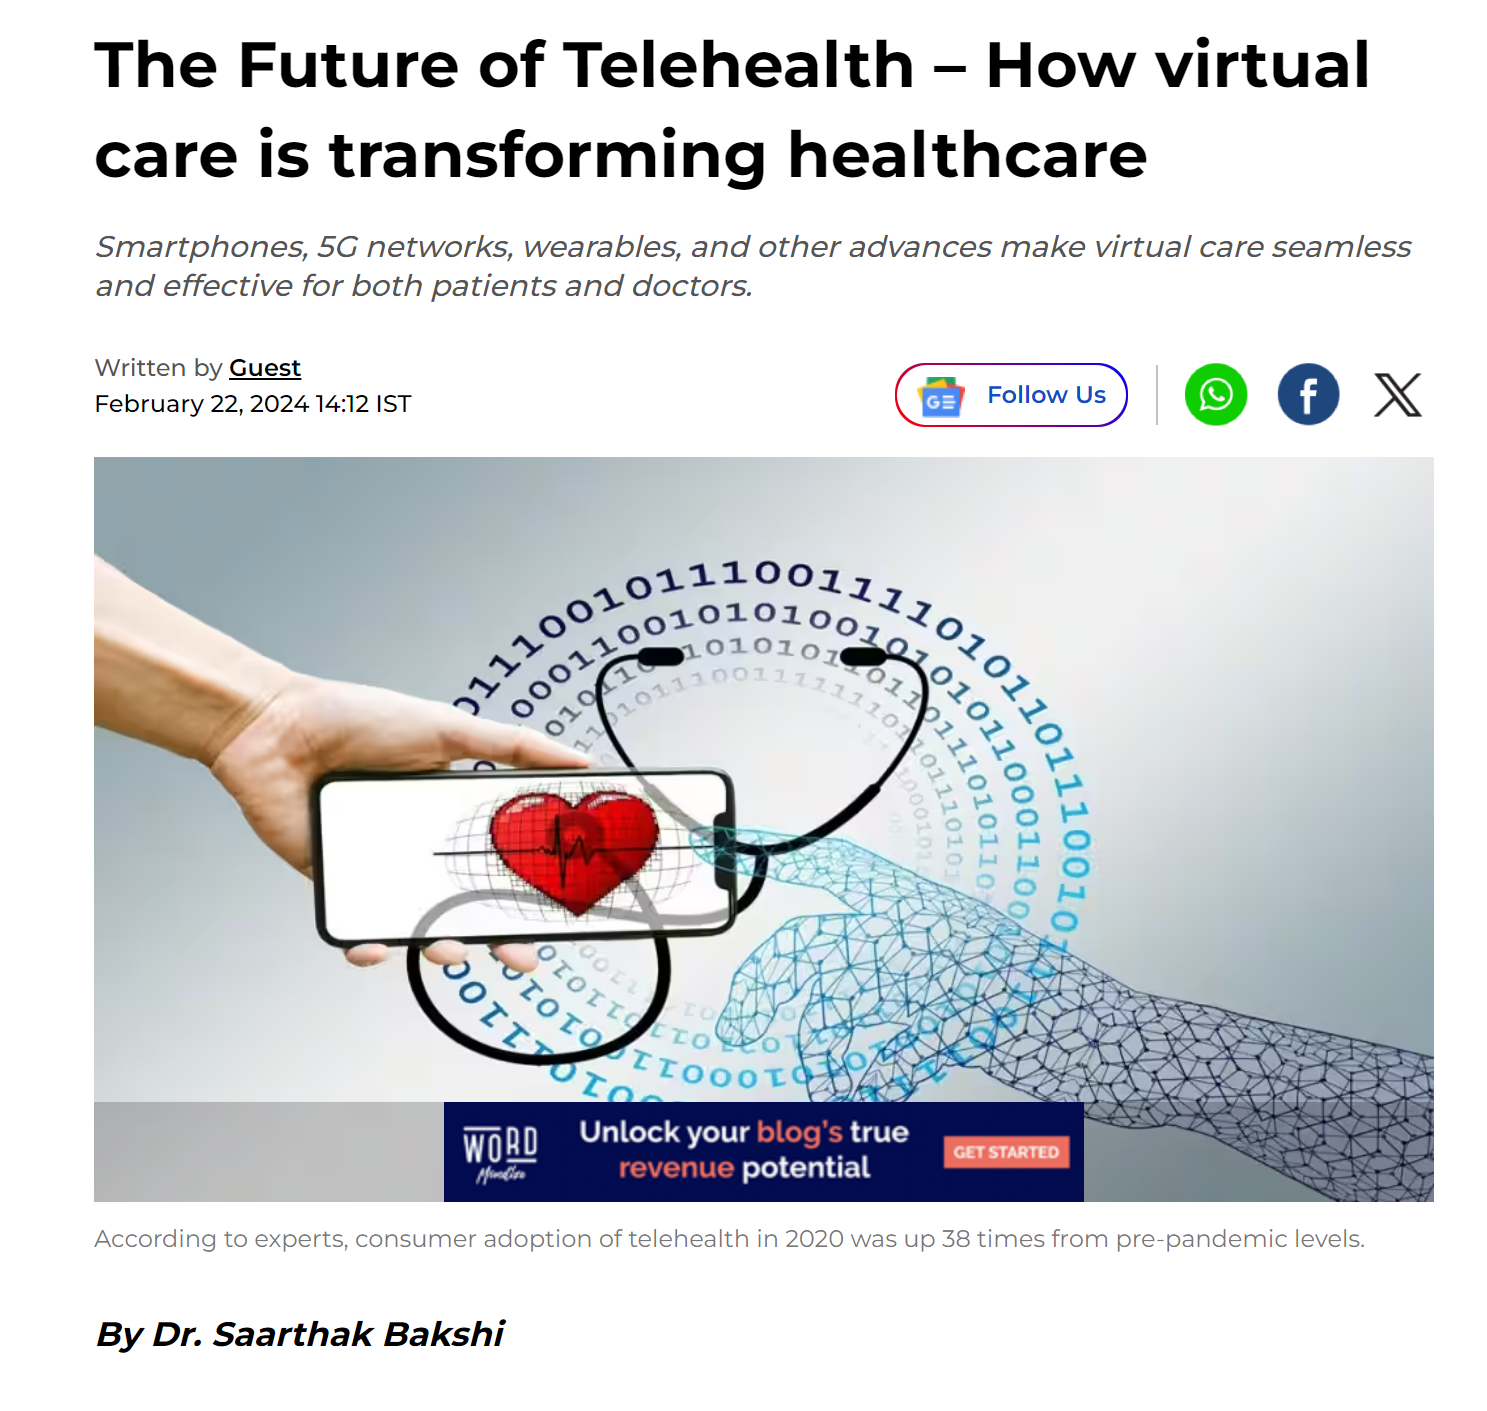 The Future of Telehealth – How virtual care is transforming healthcare